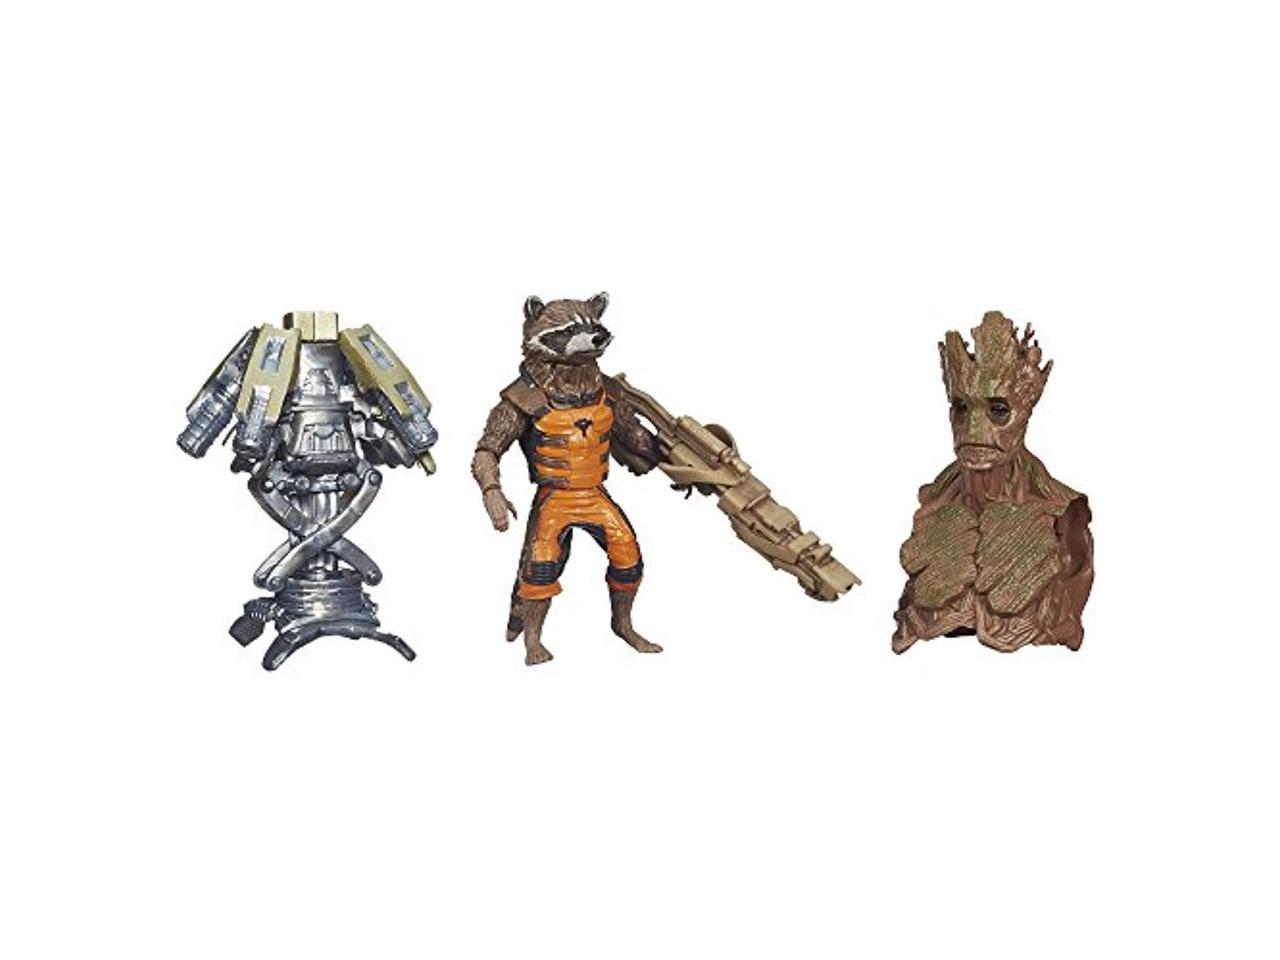 6-inch Marvel Guardians of the Galaxy Legends Series Rocket Raccoon 